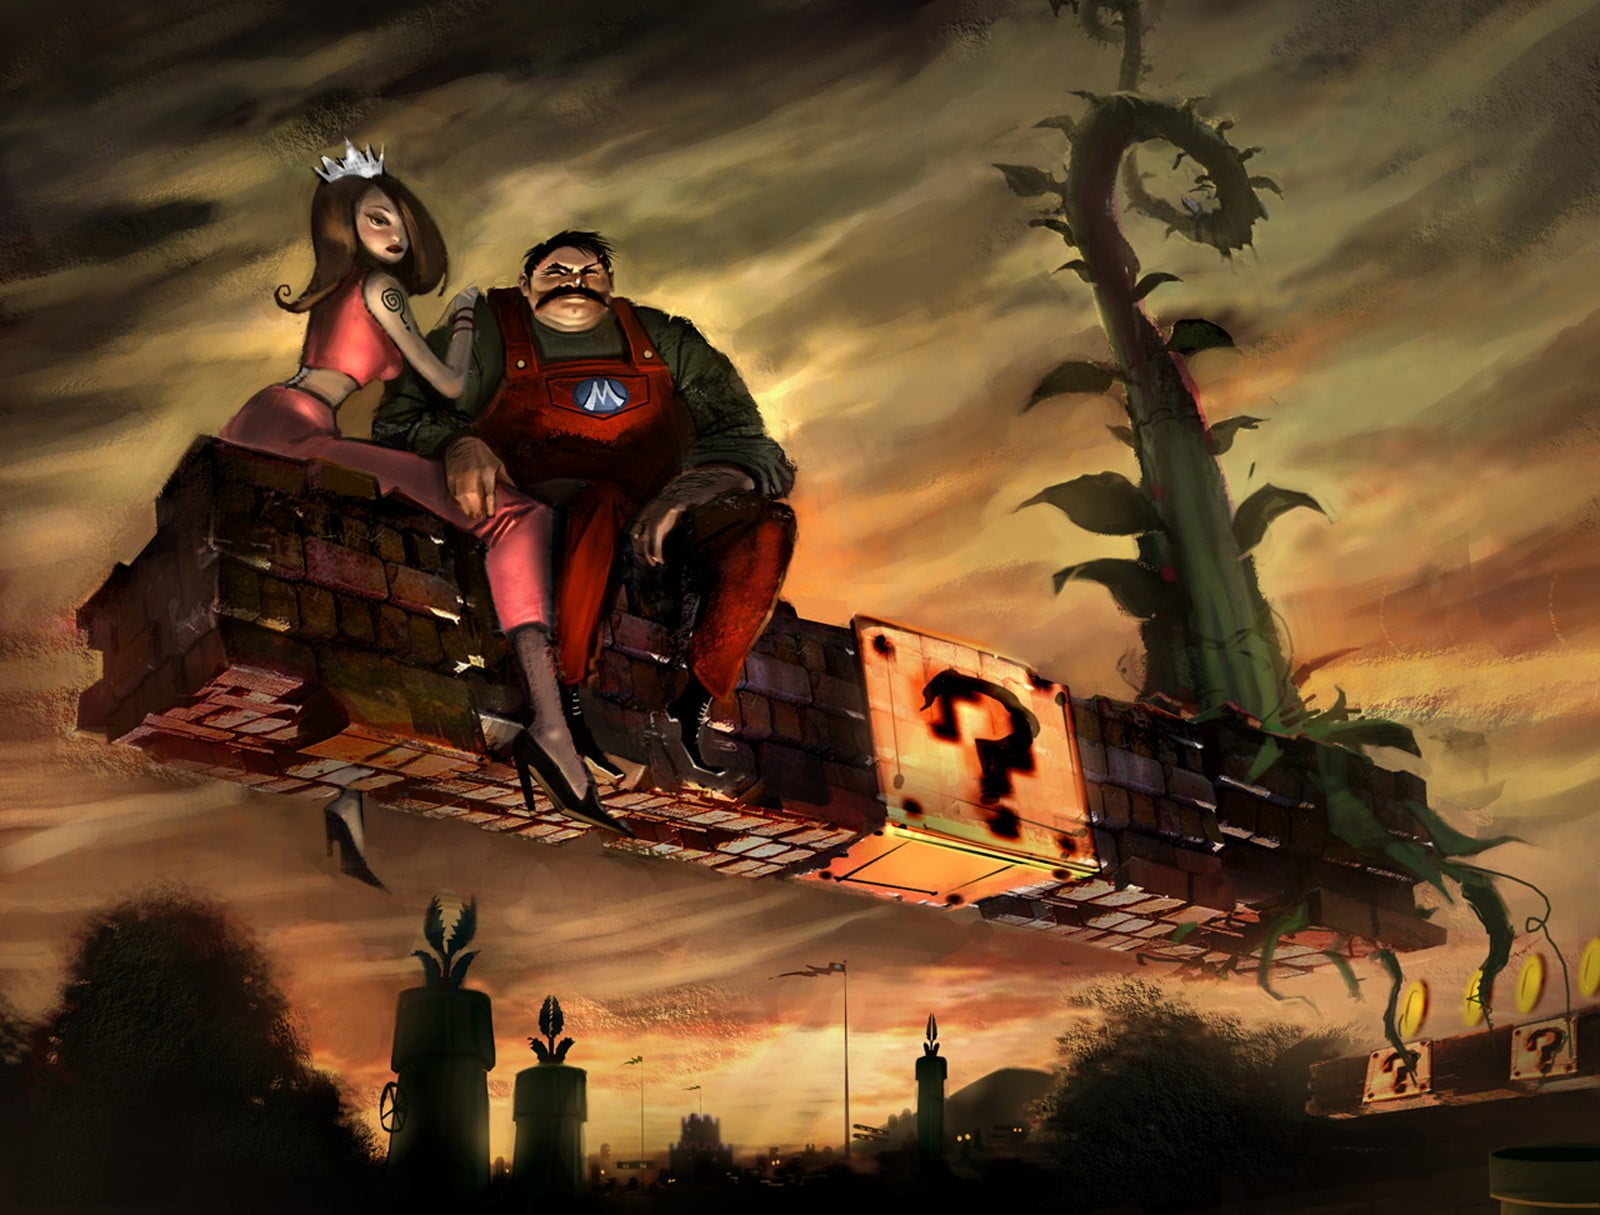 Super Mario Bros. fan art, video games, gritty, sky, nature, tree